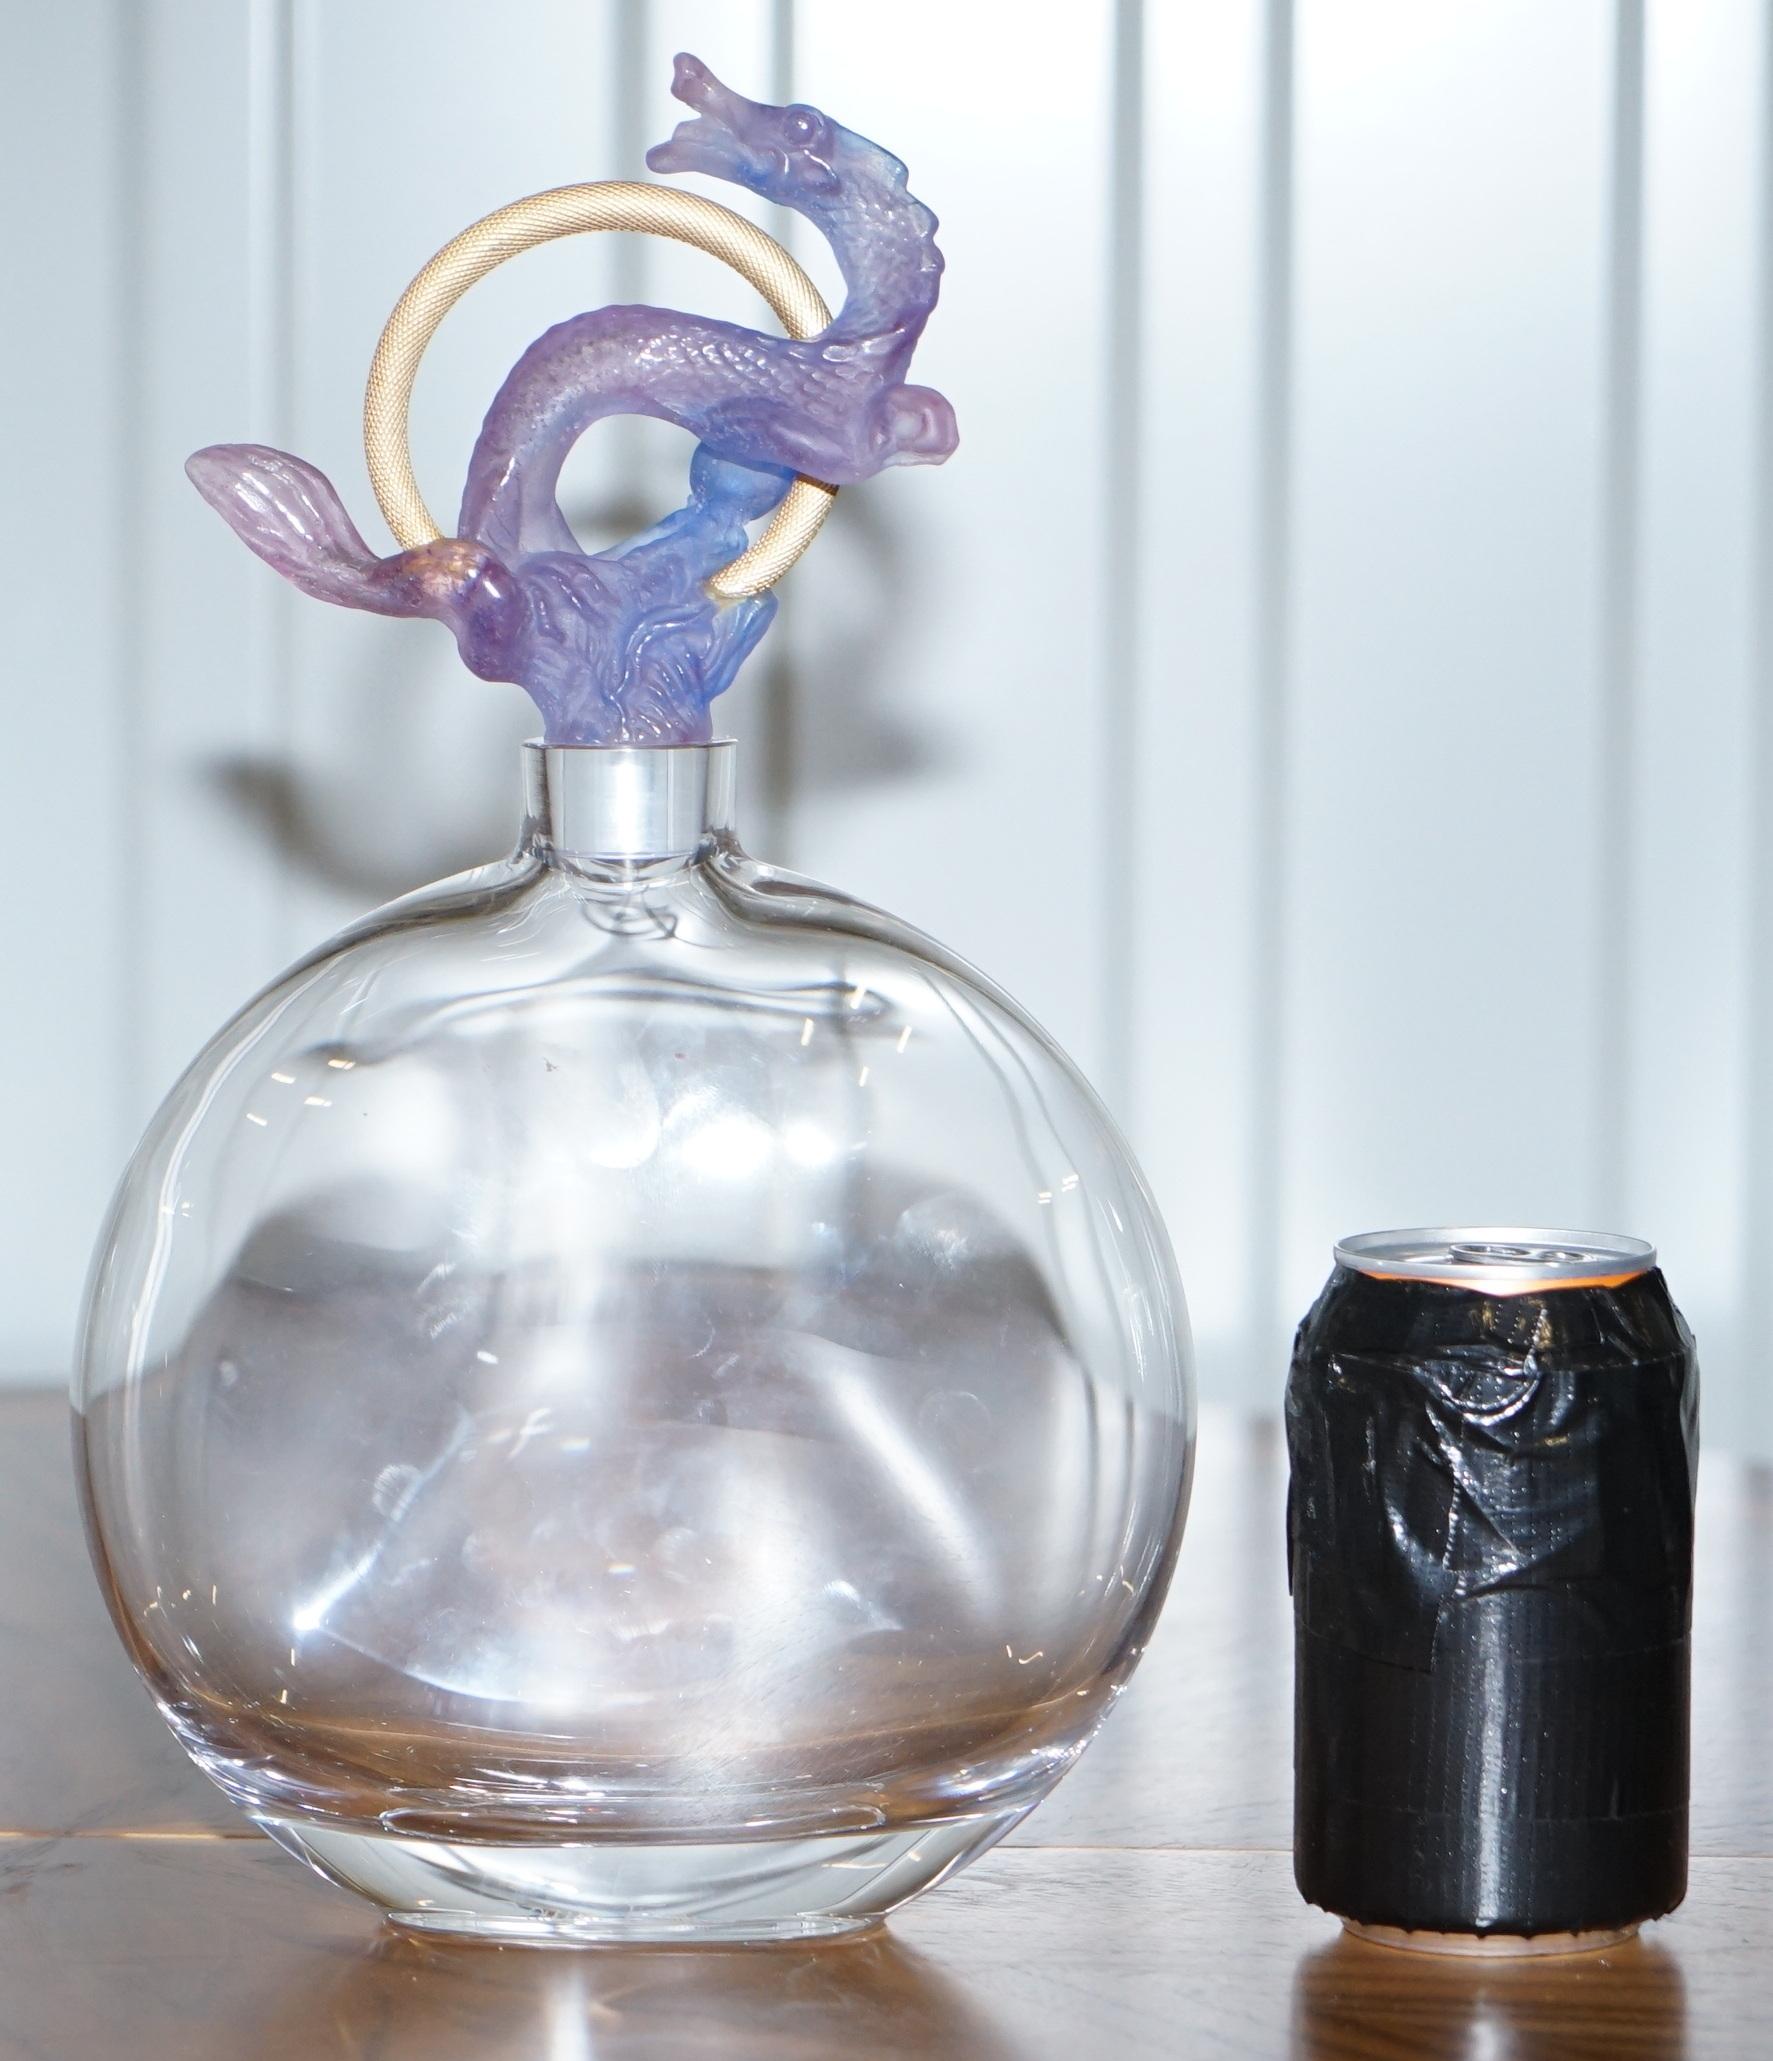 We are delighted to offer for sale 1 of 2 absolutely stunning Daum Paris France very large glass scent bottles

I have two of these, the other has a stunning Rooster on top and is listed under my other items

As you can see in the picture next